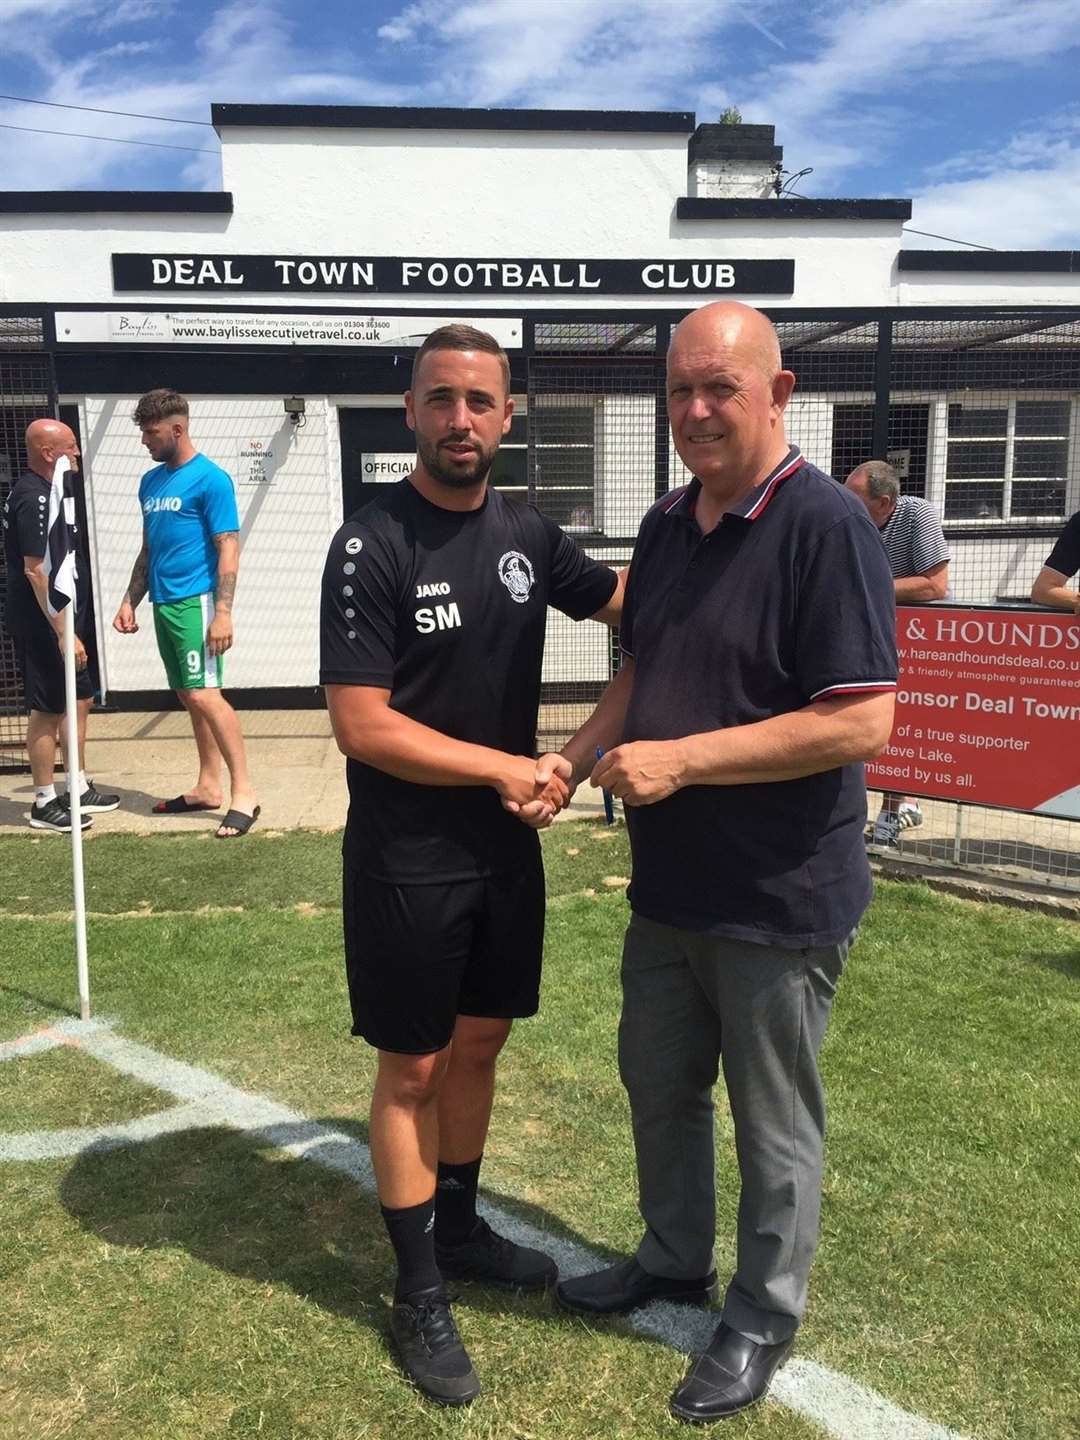 Sammy Moore will put his football training skills to good use. The ex-footballer is pictured here with Deal Town manager Derek Hares